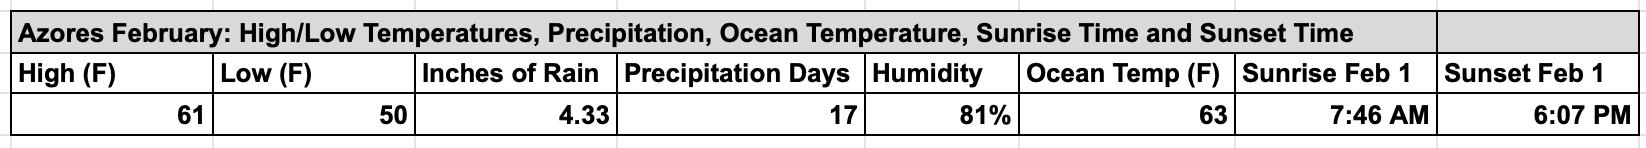 Azores-Weather-in-February-Chart-Including-Humidity